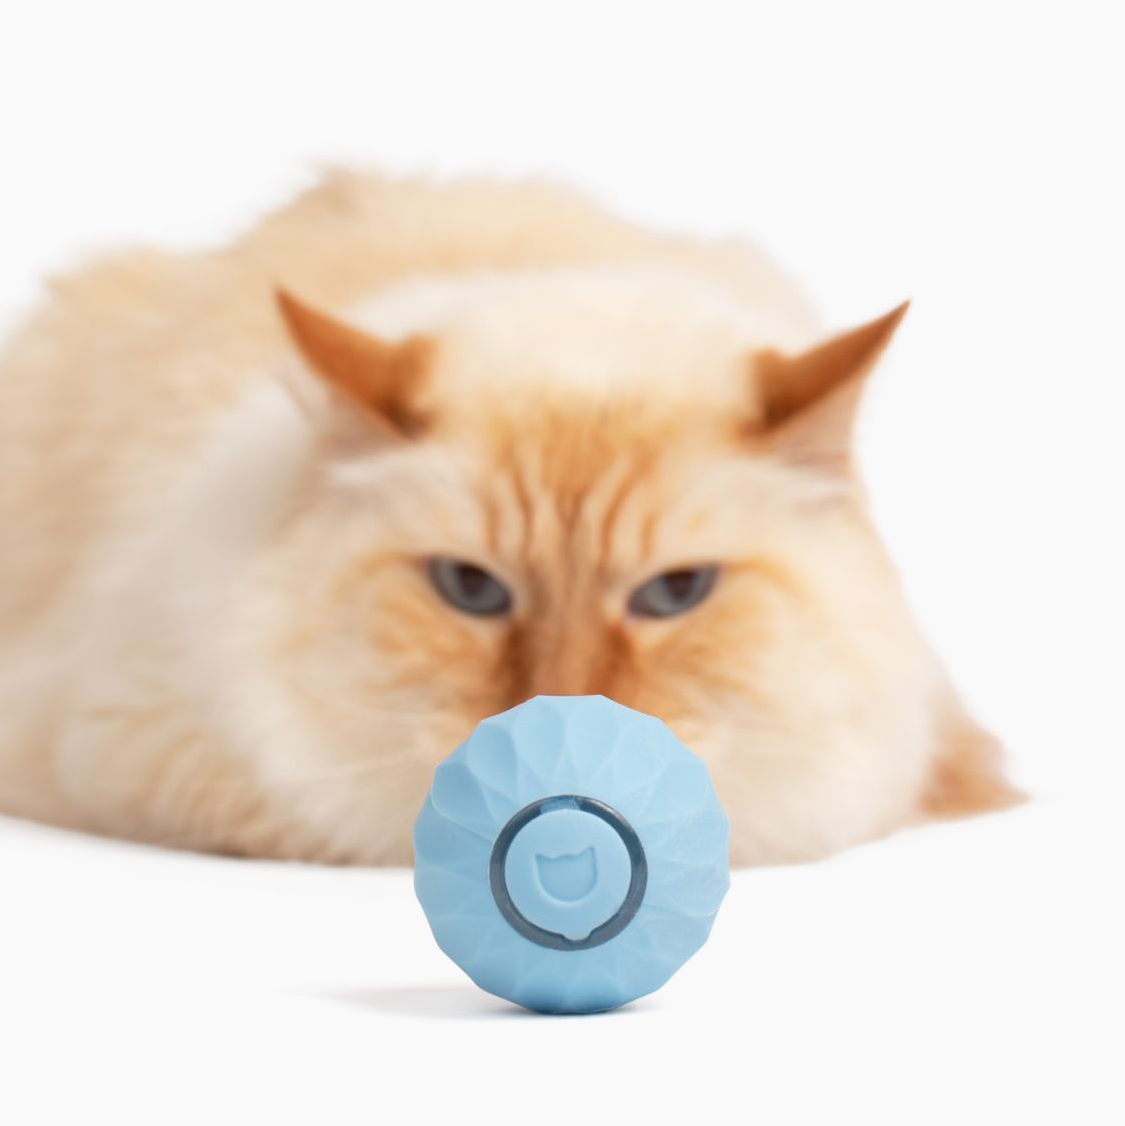  EARFORU Purrball Purr Ball Cat Toy, Power Ball Powerball 2.0  Cat Toy, Rotating Smart Ball Cat Aiveys, Interactive Automatic Rolling  Smart Ball, Peppy Pet Ball for Cats Indoor Outdoor (2 Ball) 